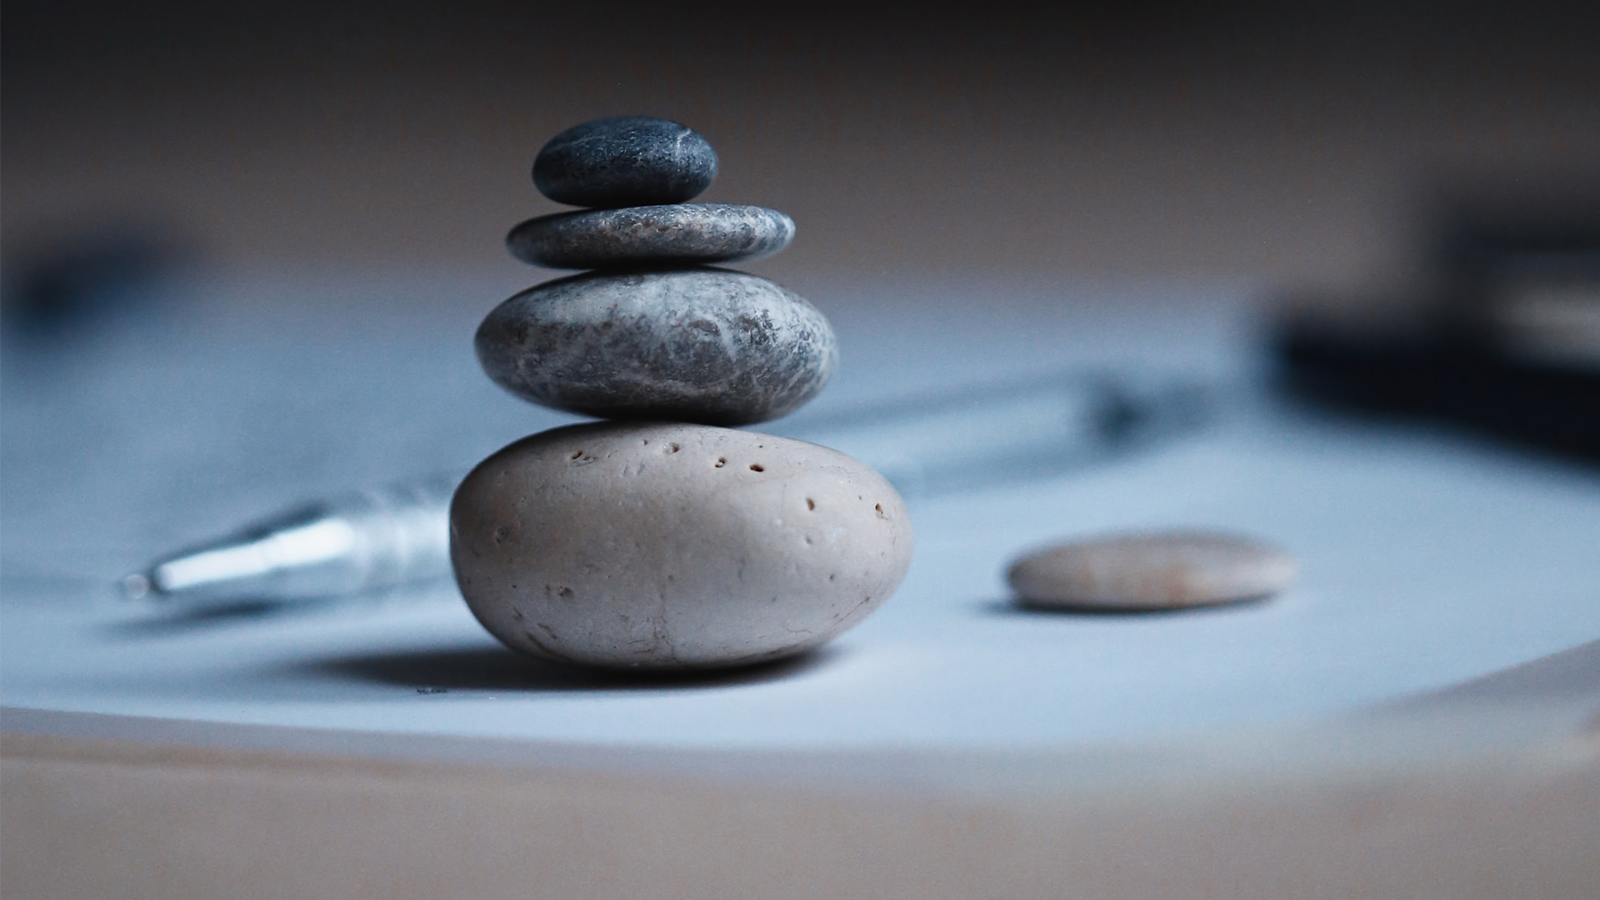 stack of stones on a work desk